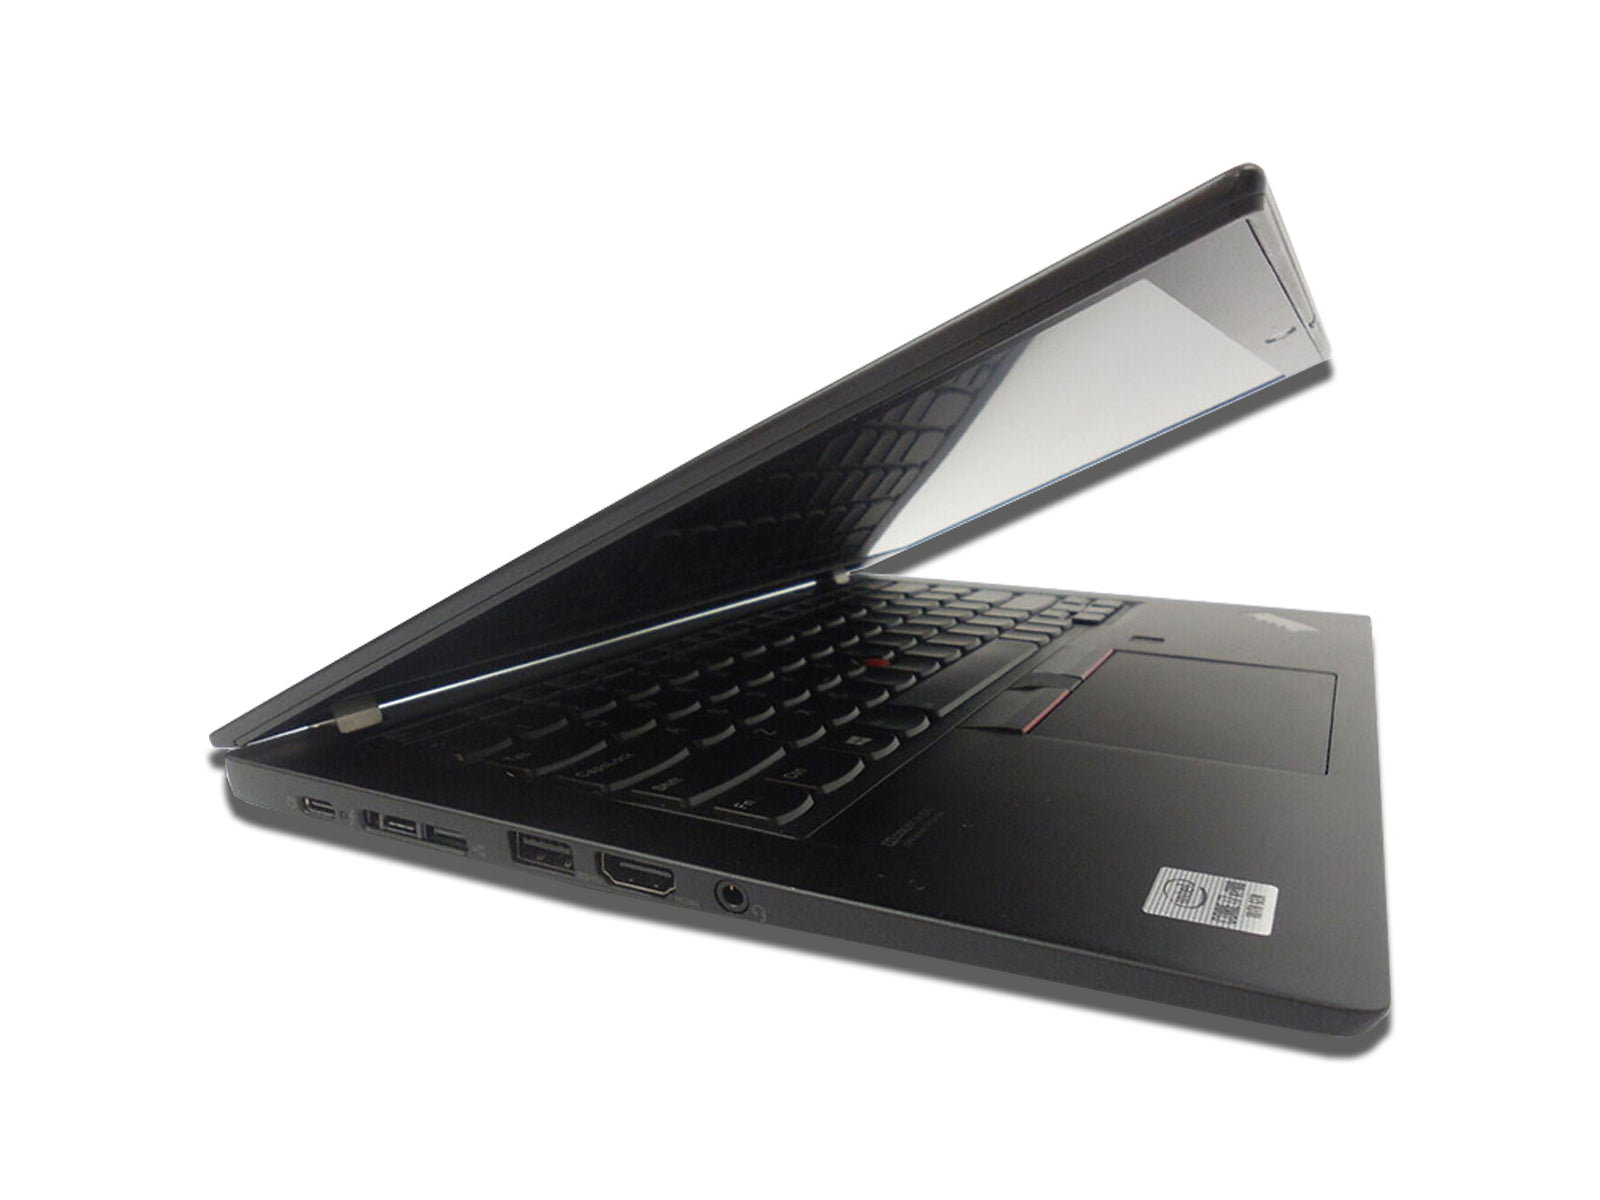 Left Front Partially open Image of The Lenovo L390 Laptop on The White Background